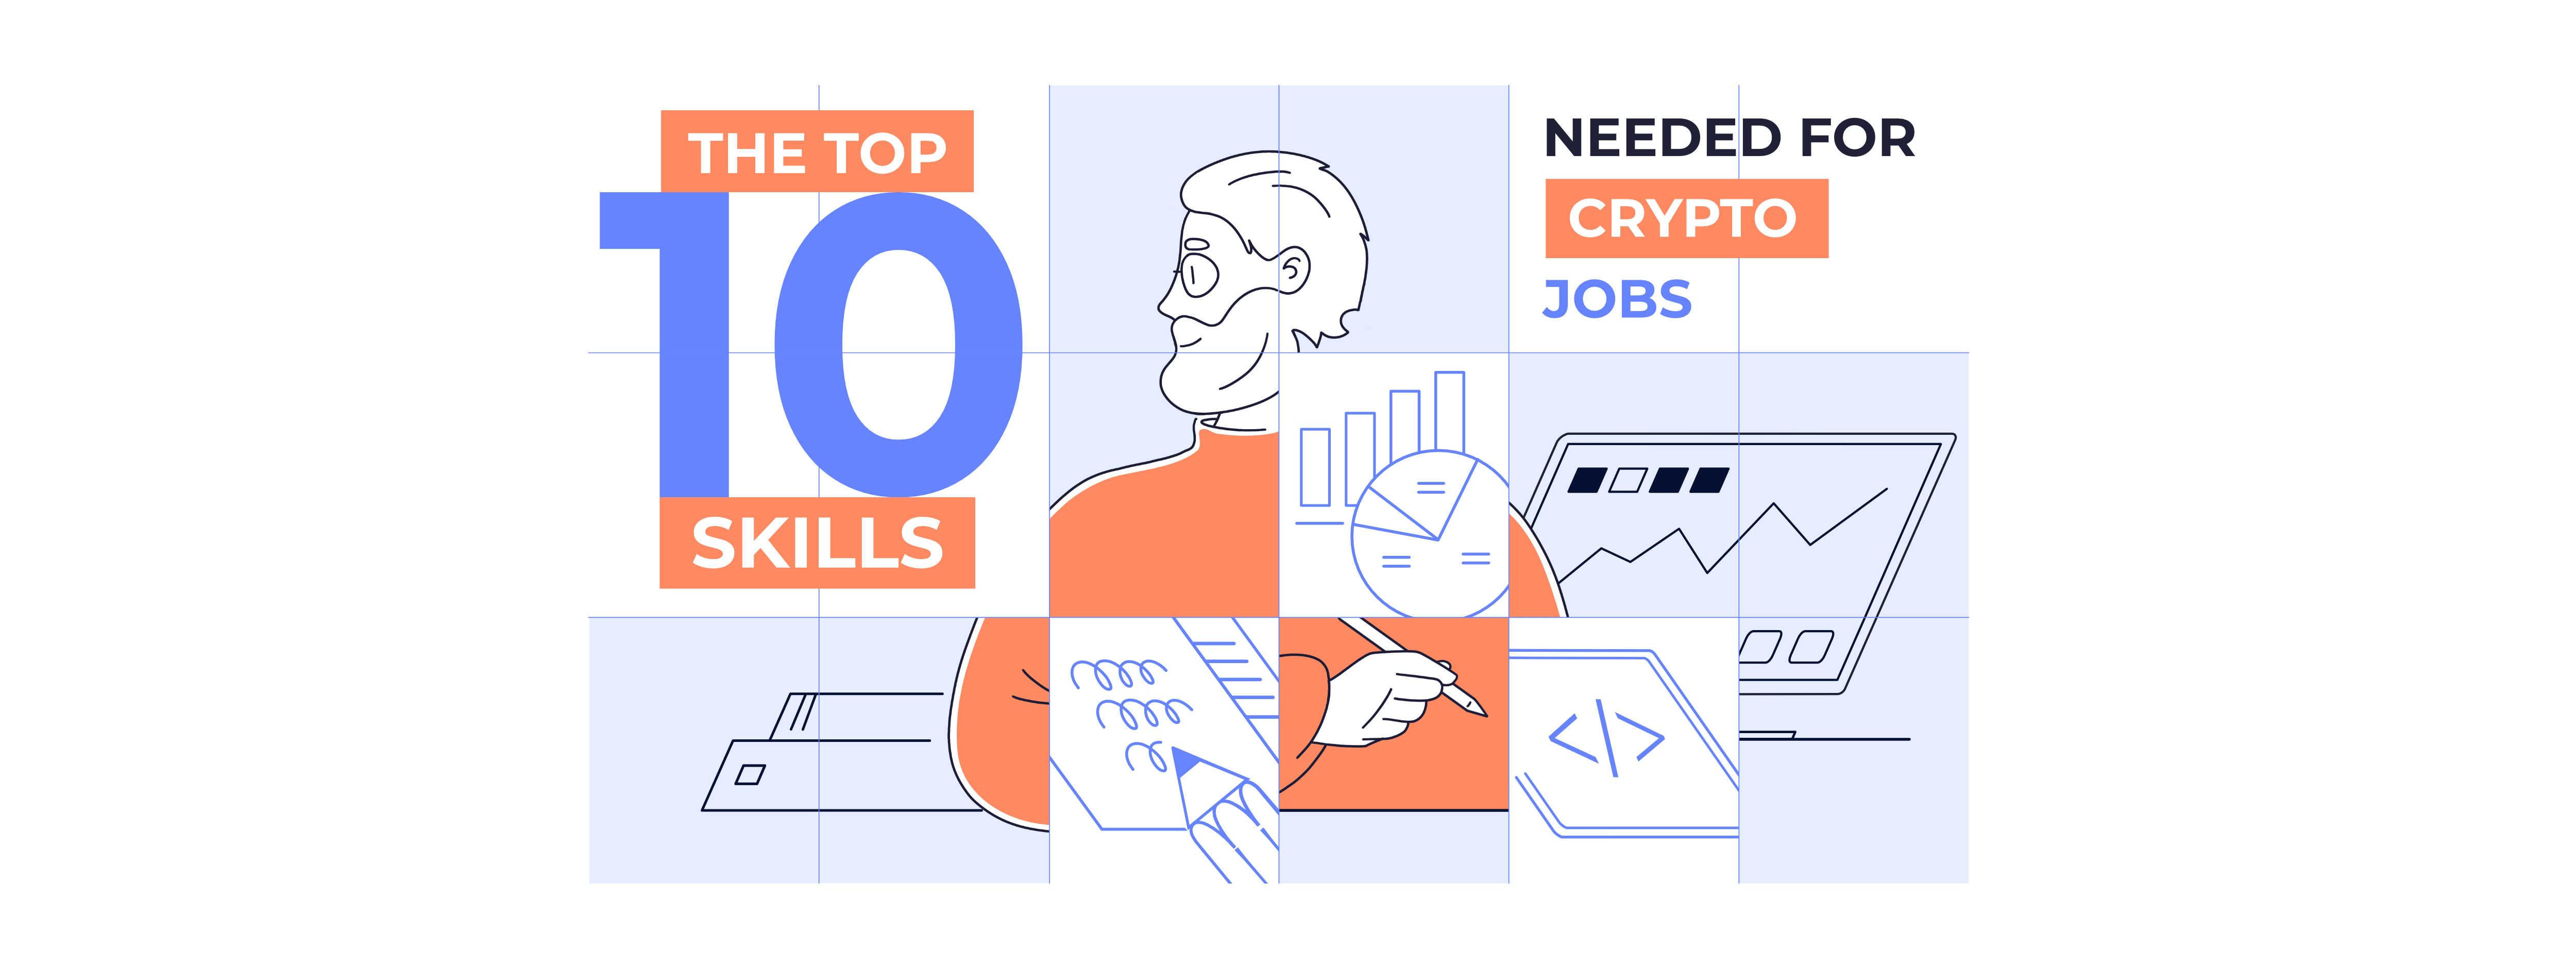 The Top 10 Skills Needed for Crypto Jobs